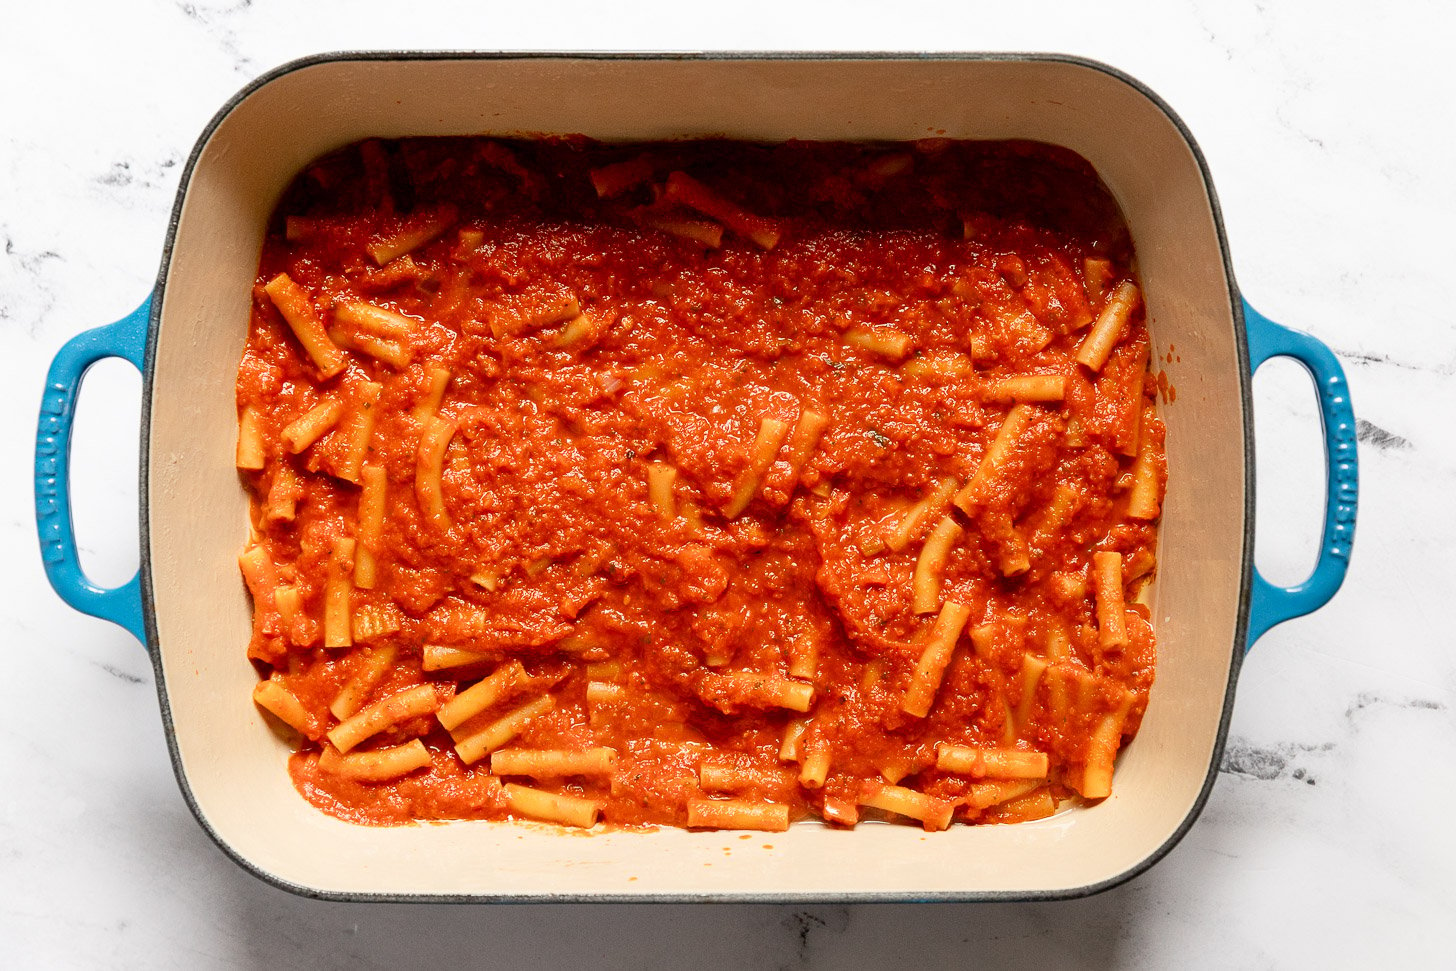 Pasta and sauce in casserole pan.